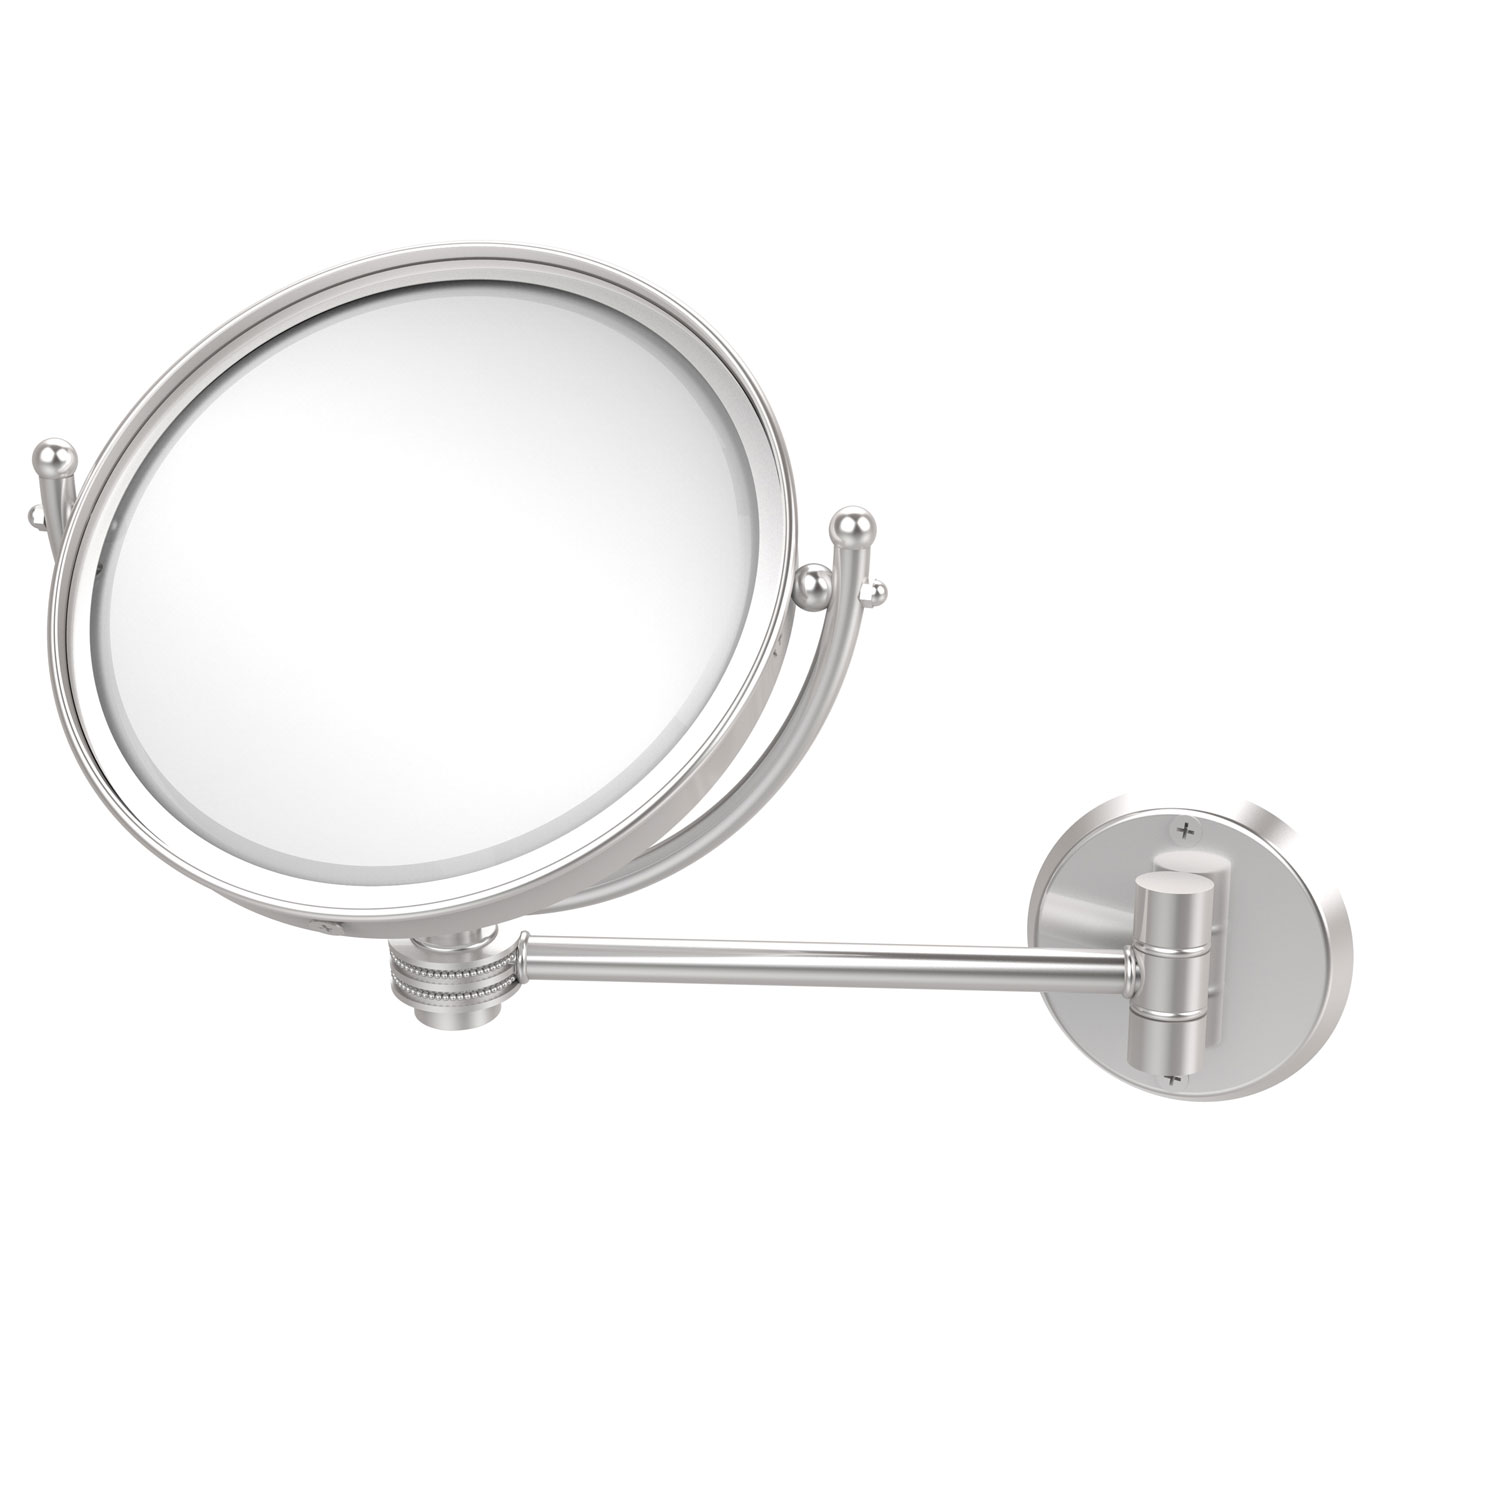 8 Inch Wall Mounted Make-Up Mirror 3X Magnification, Satin Chrome